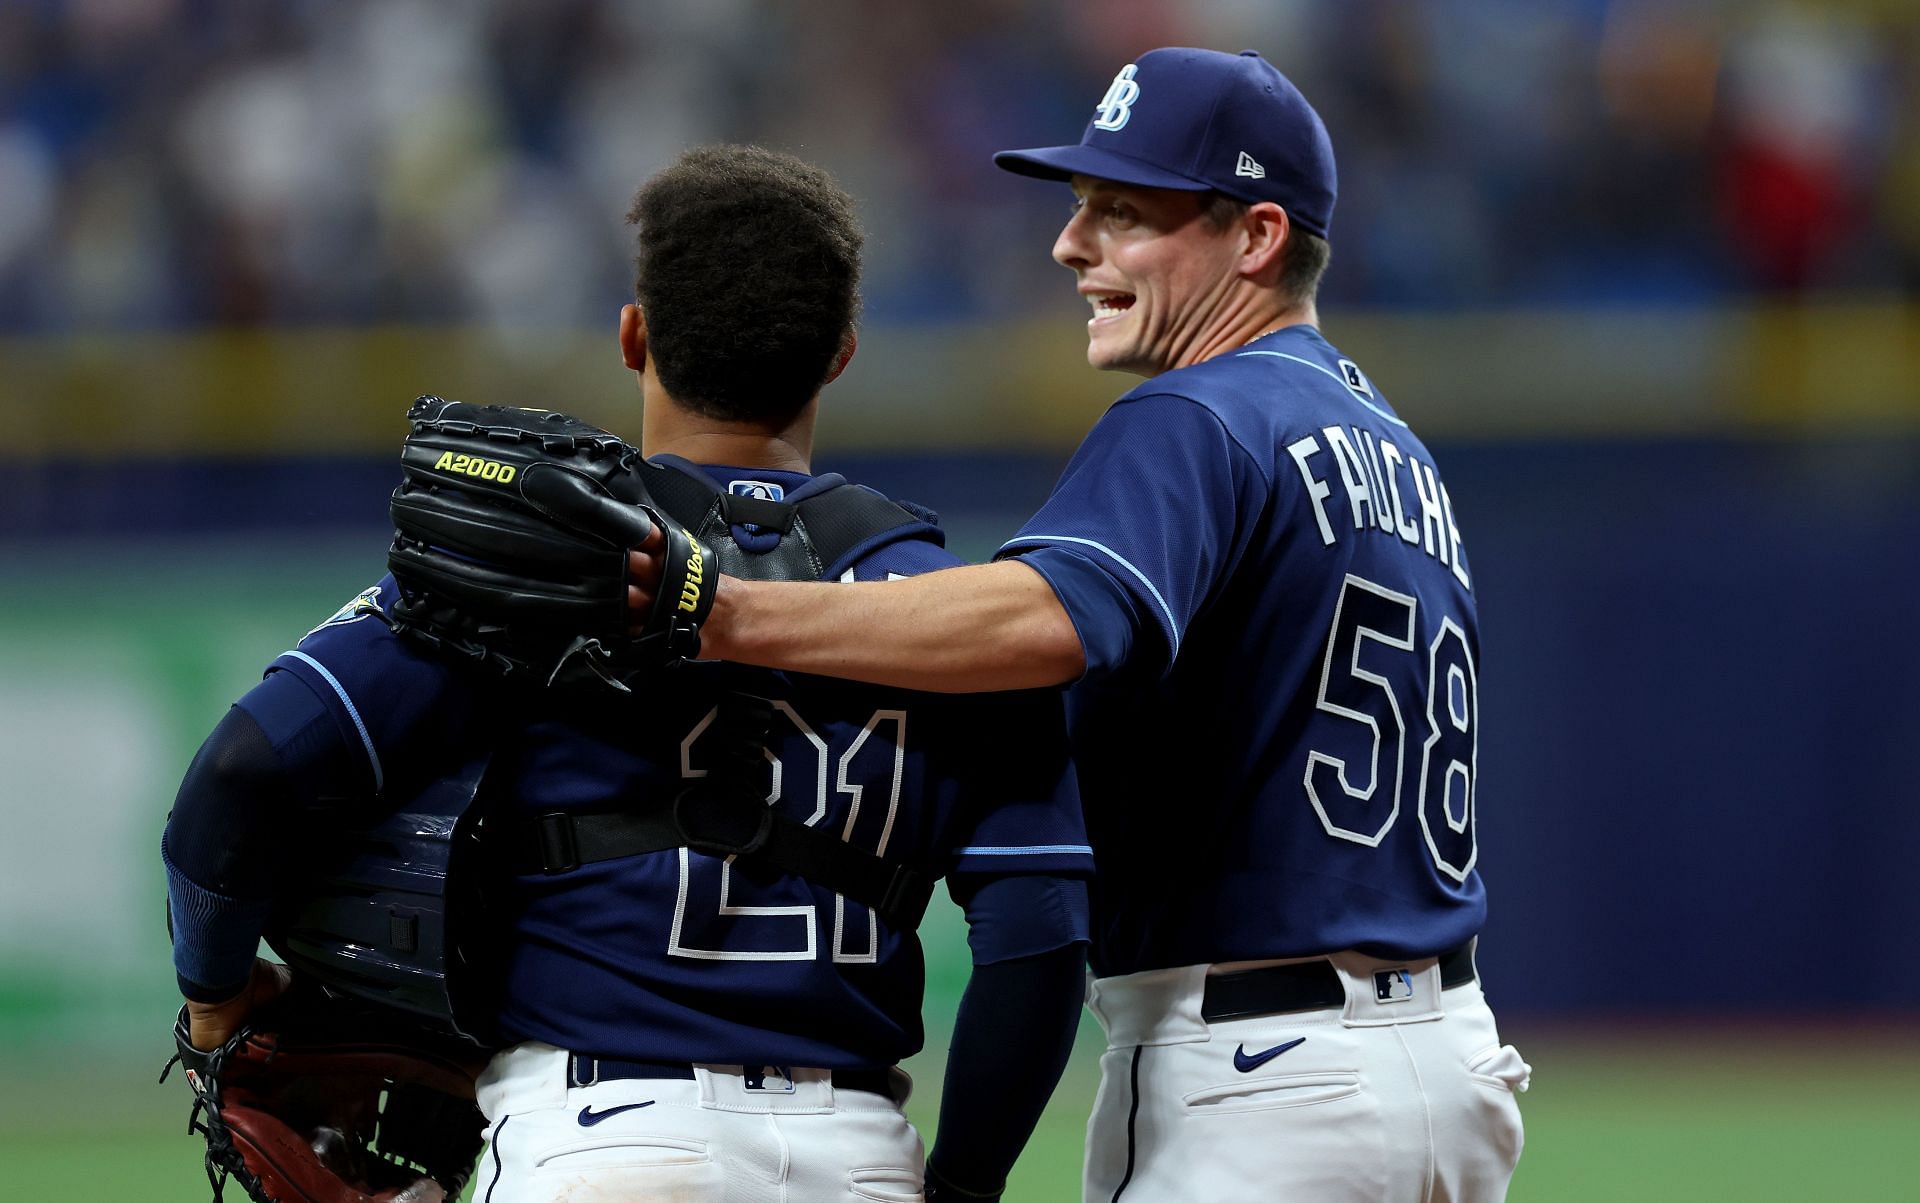 By not cheating, the Rays lost more than the Astros or Red Sox